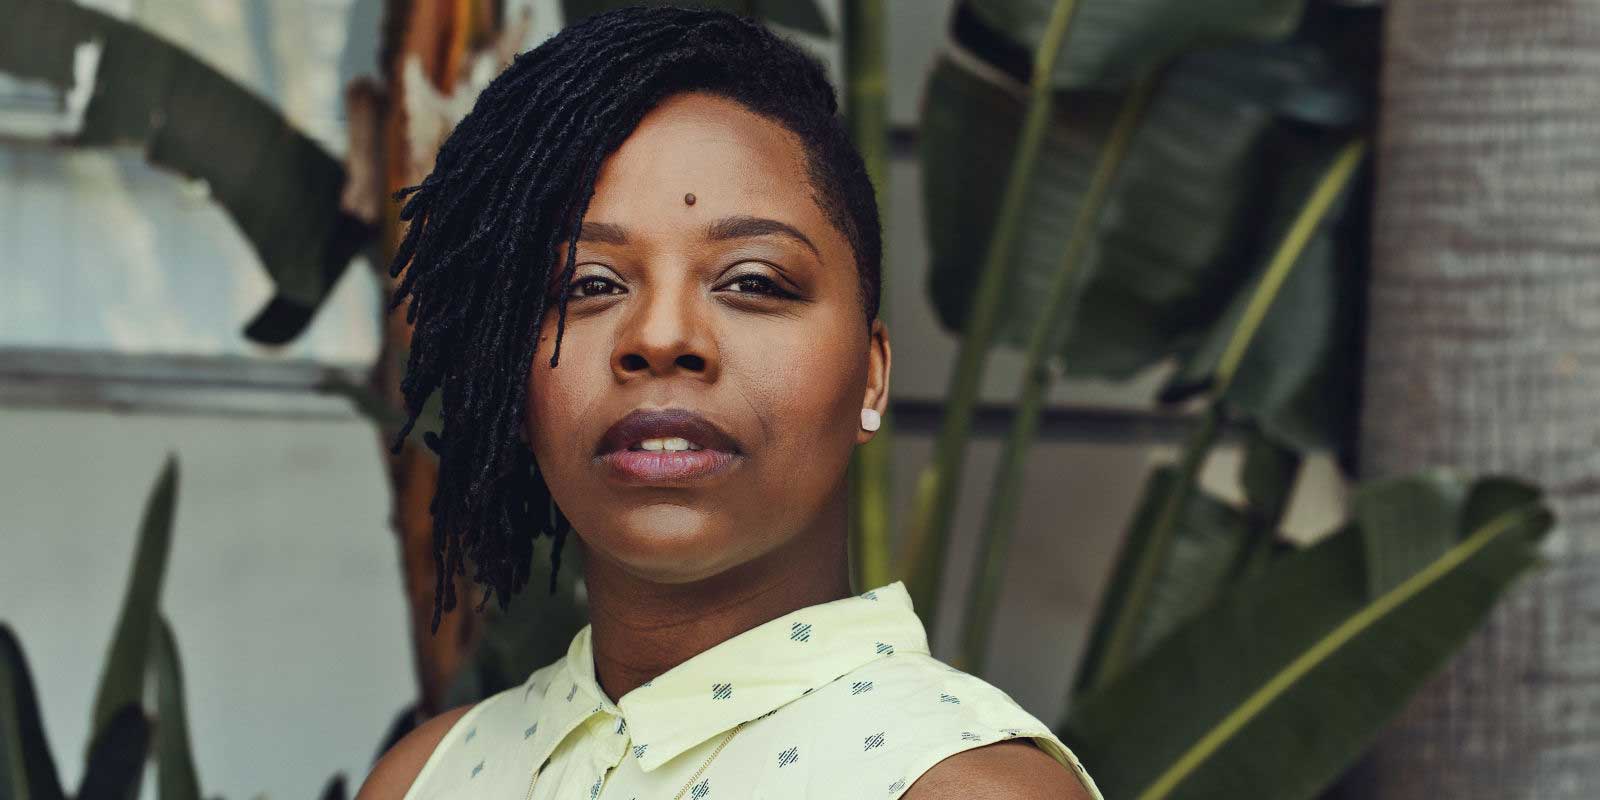 Patrisse Cullors, Ph.D., Speaks on February 16 about Essential Resistance